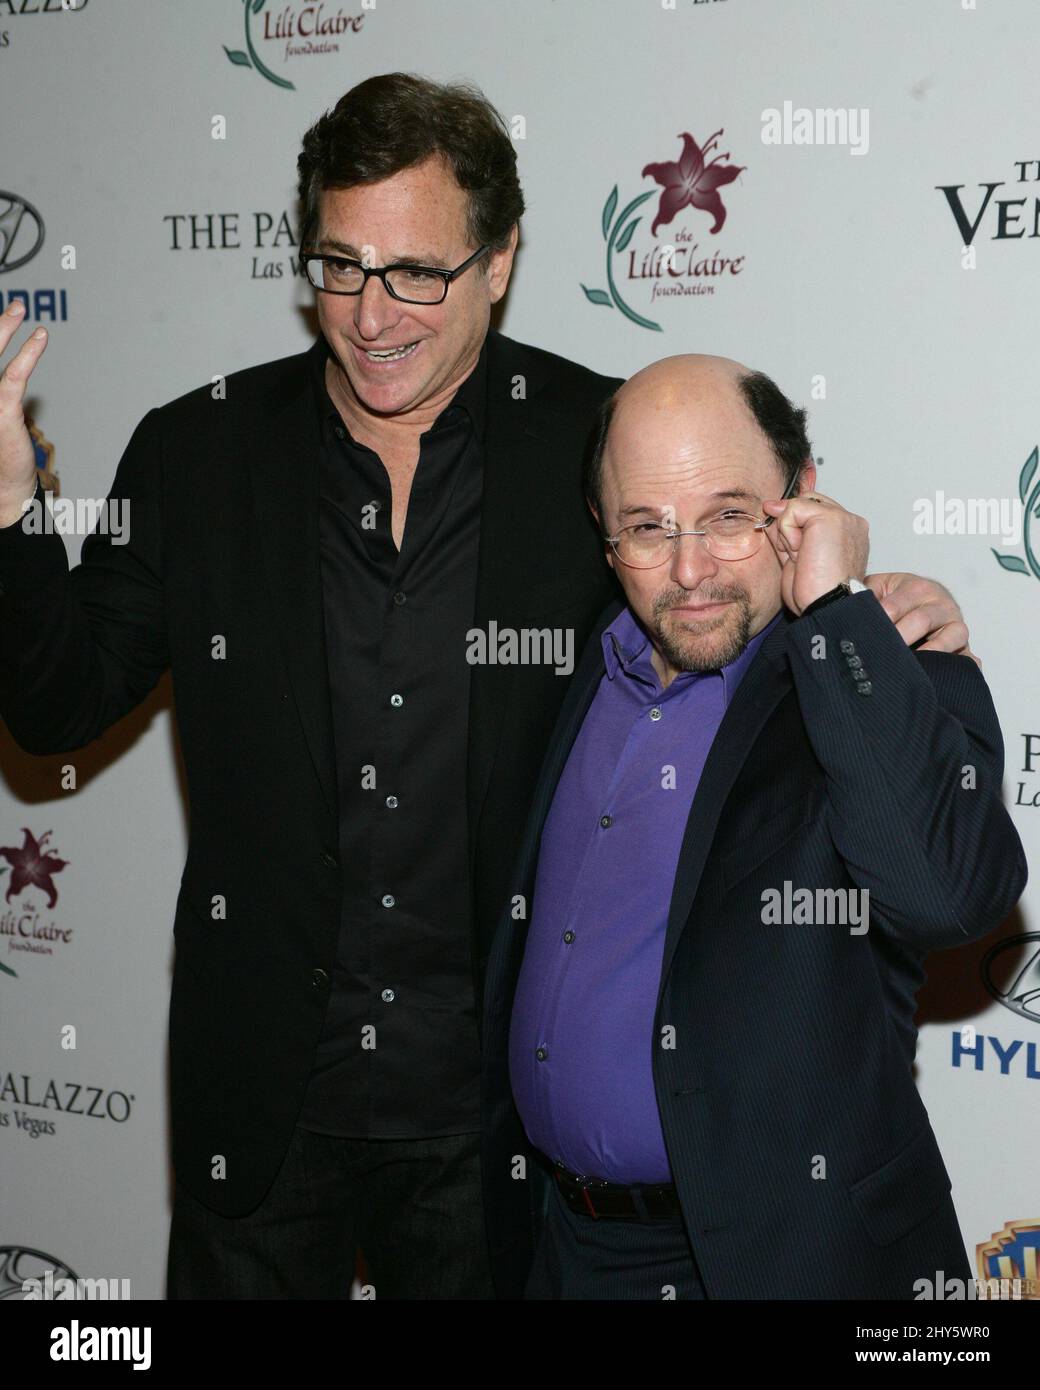 Bob Saget, Jason Alexander arriving for the The Lili Claire €˜Live Your Passion€™ Celebrity Benefit and Concert, The Palazzo Las Vegas. Stock Photo